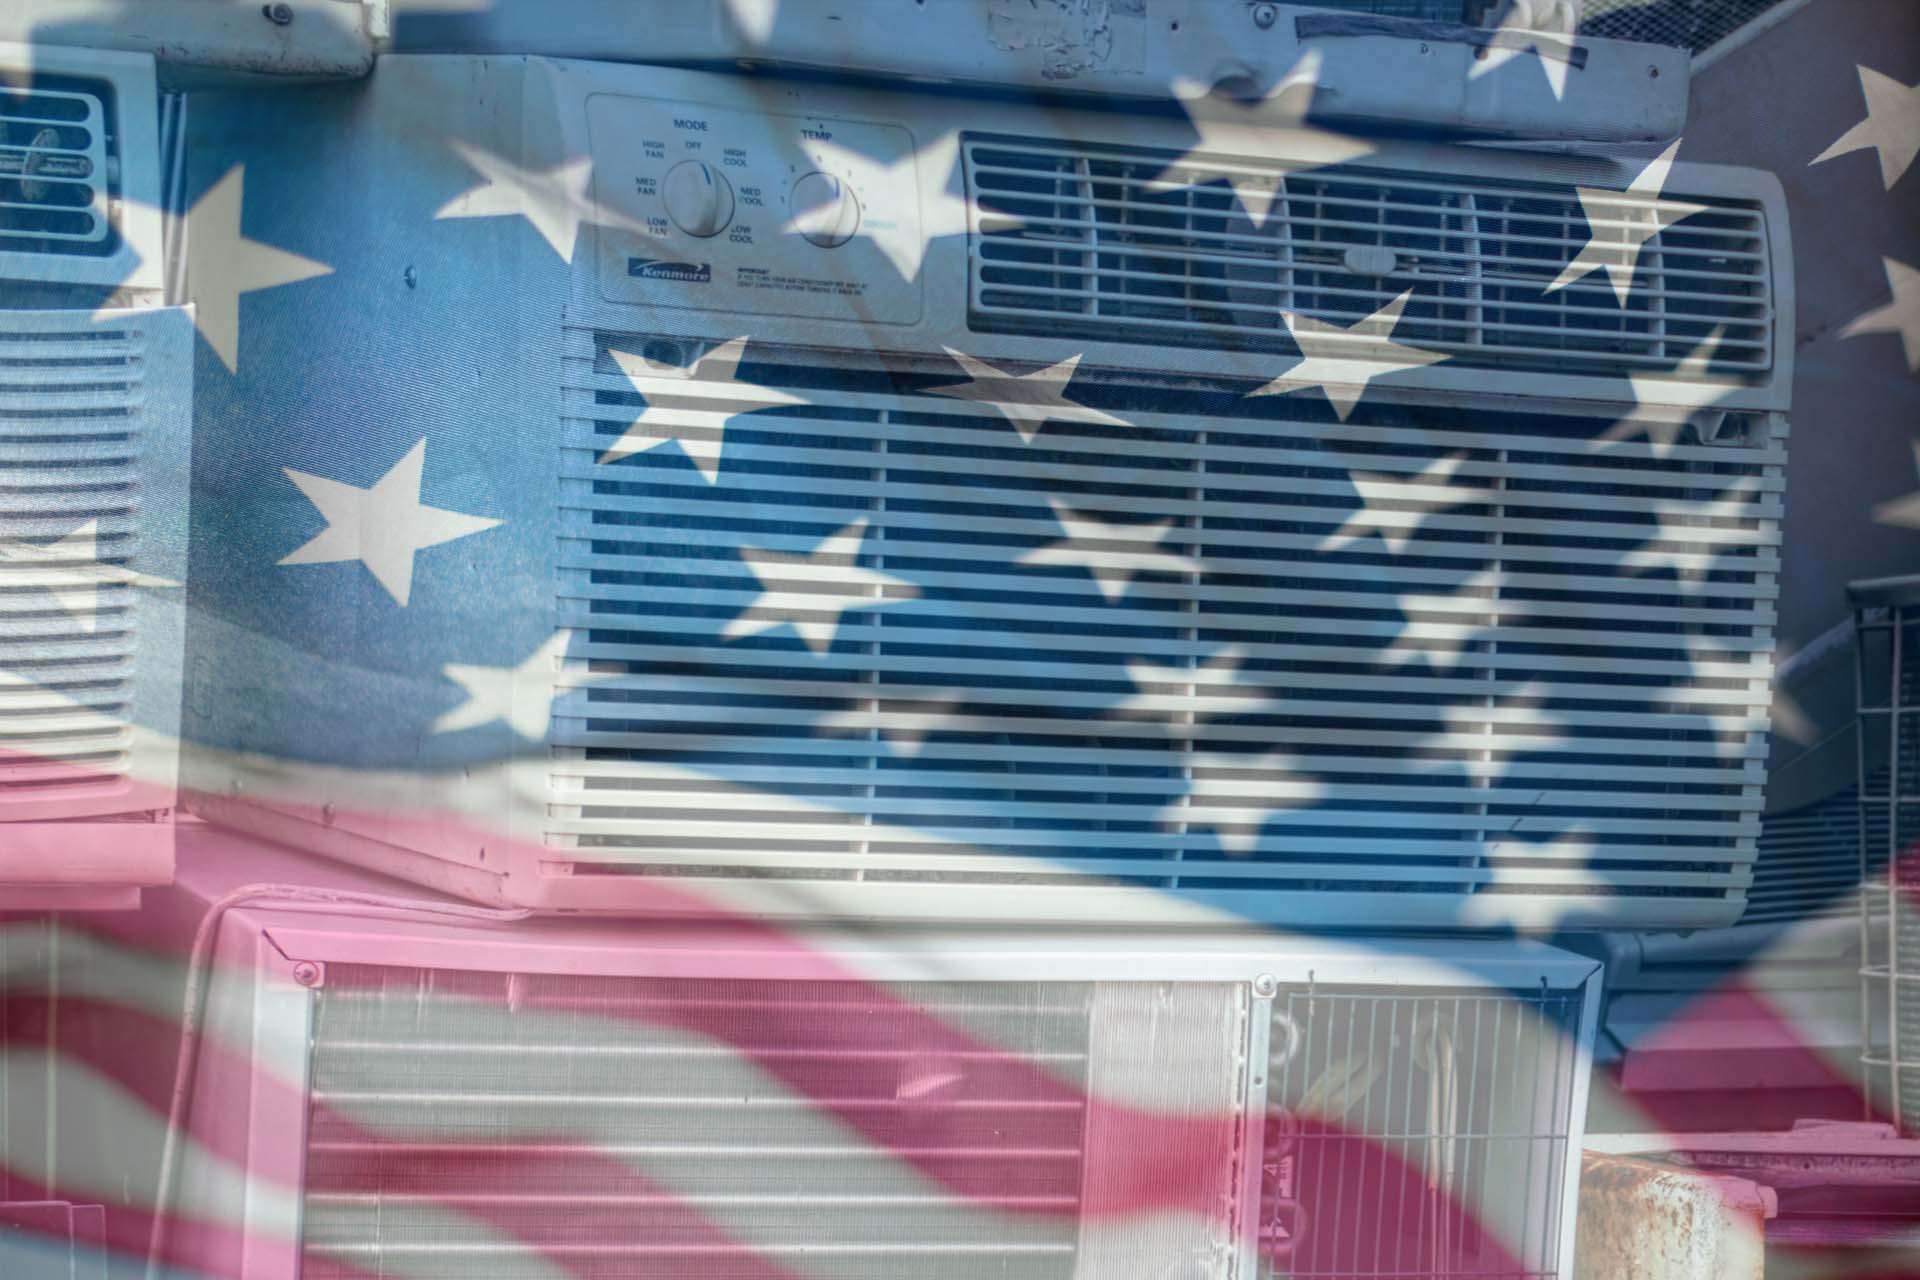 A U.S flag superimposed over old air conditioner units